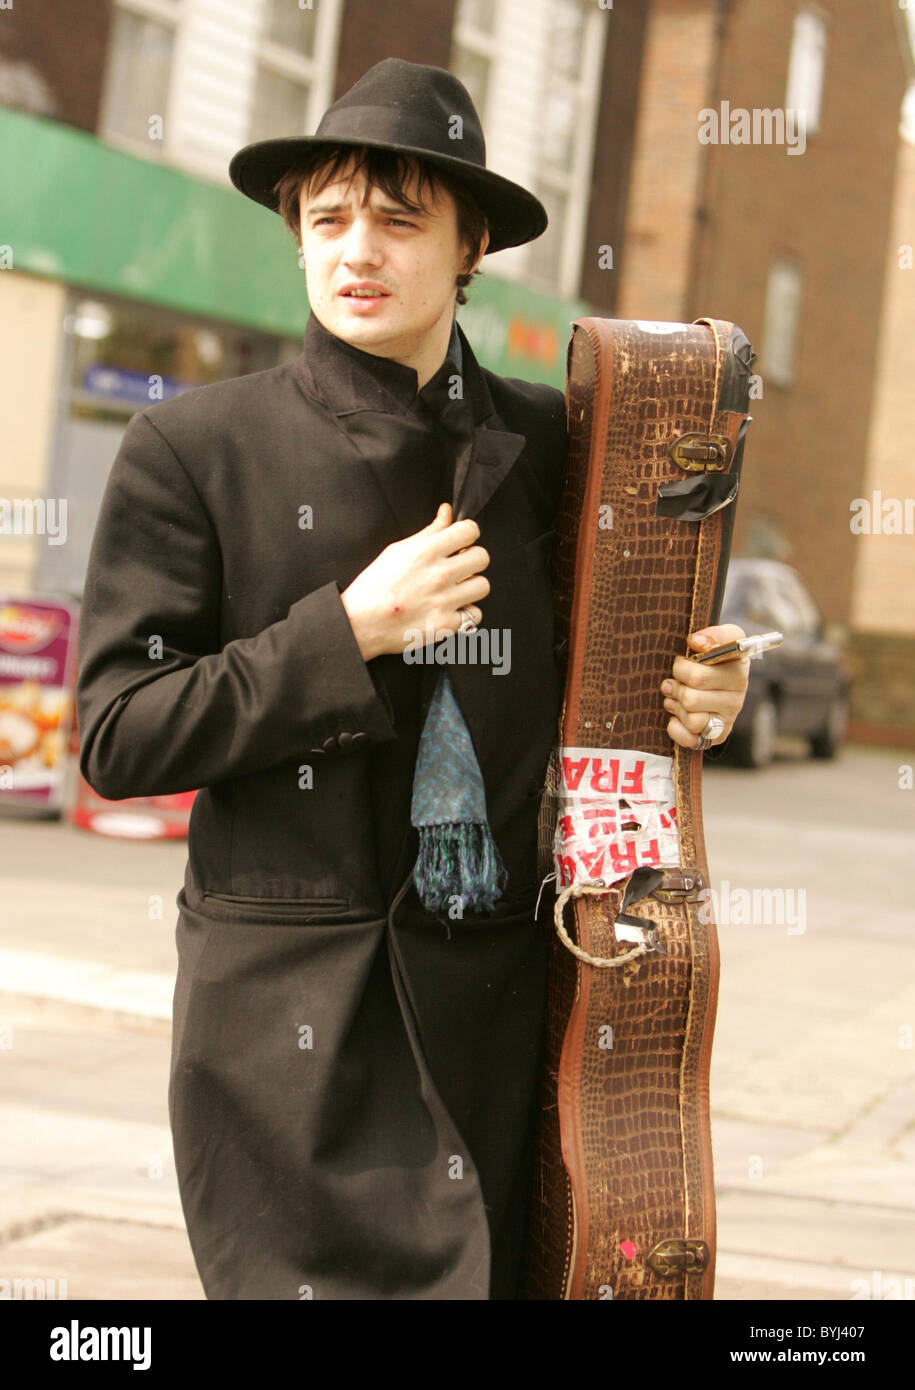 Pete Doherty leaves his girlfriend Kate Moss, who is going to a photoshoot, with the words 'I love you'.  London, England Stock Photo